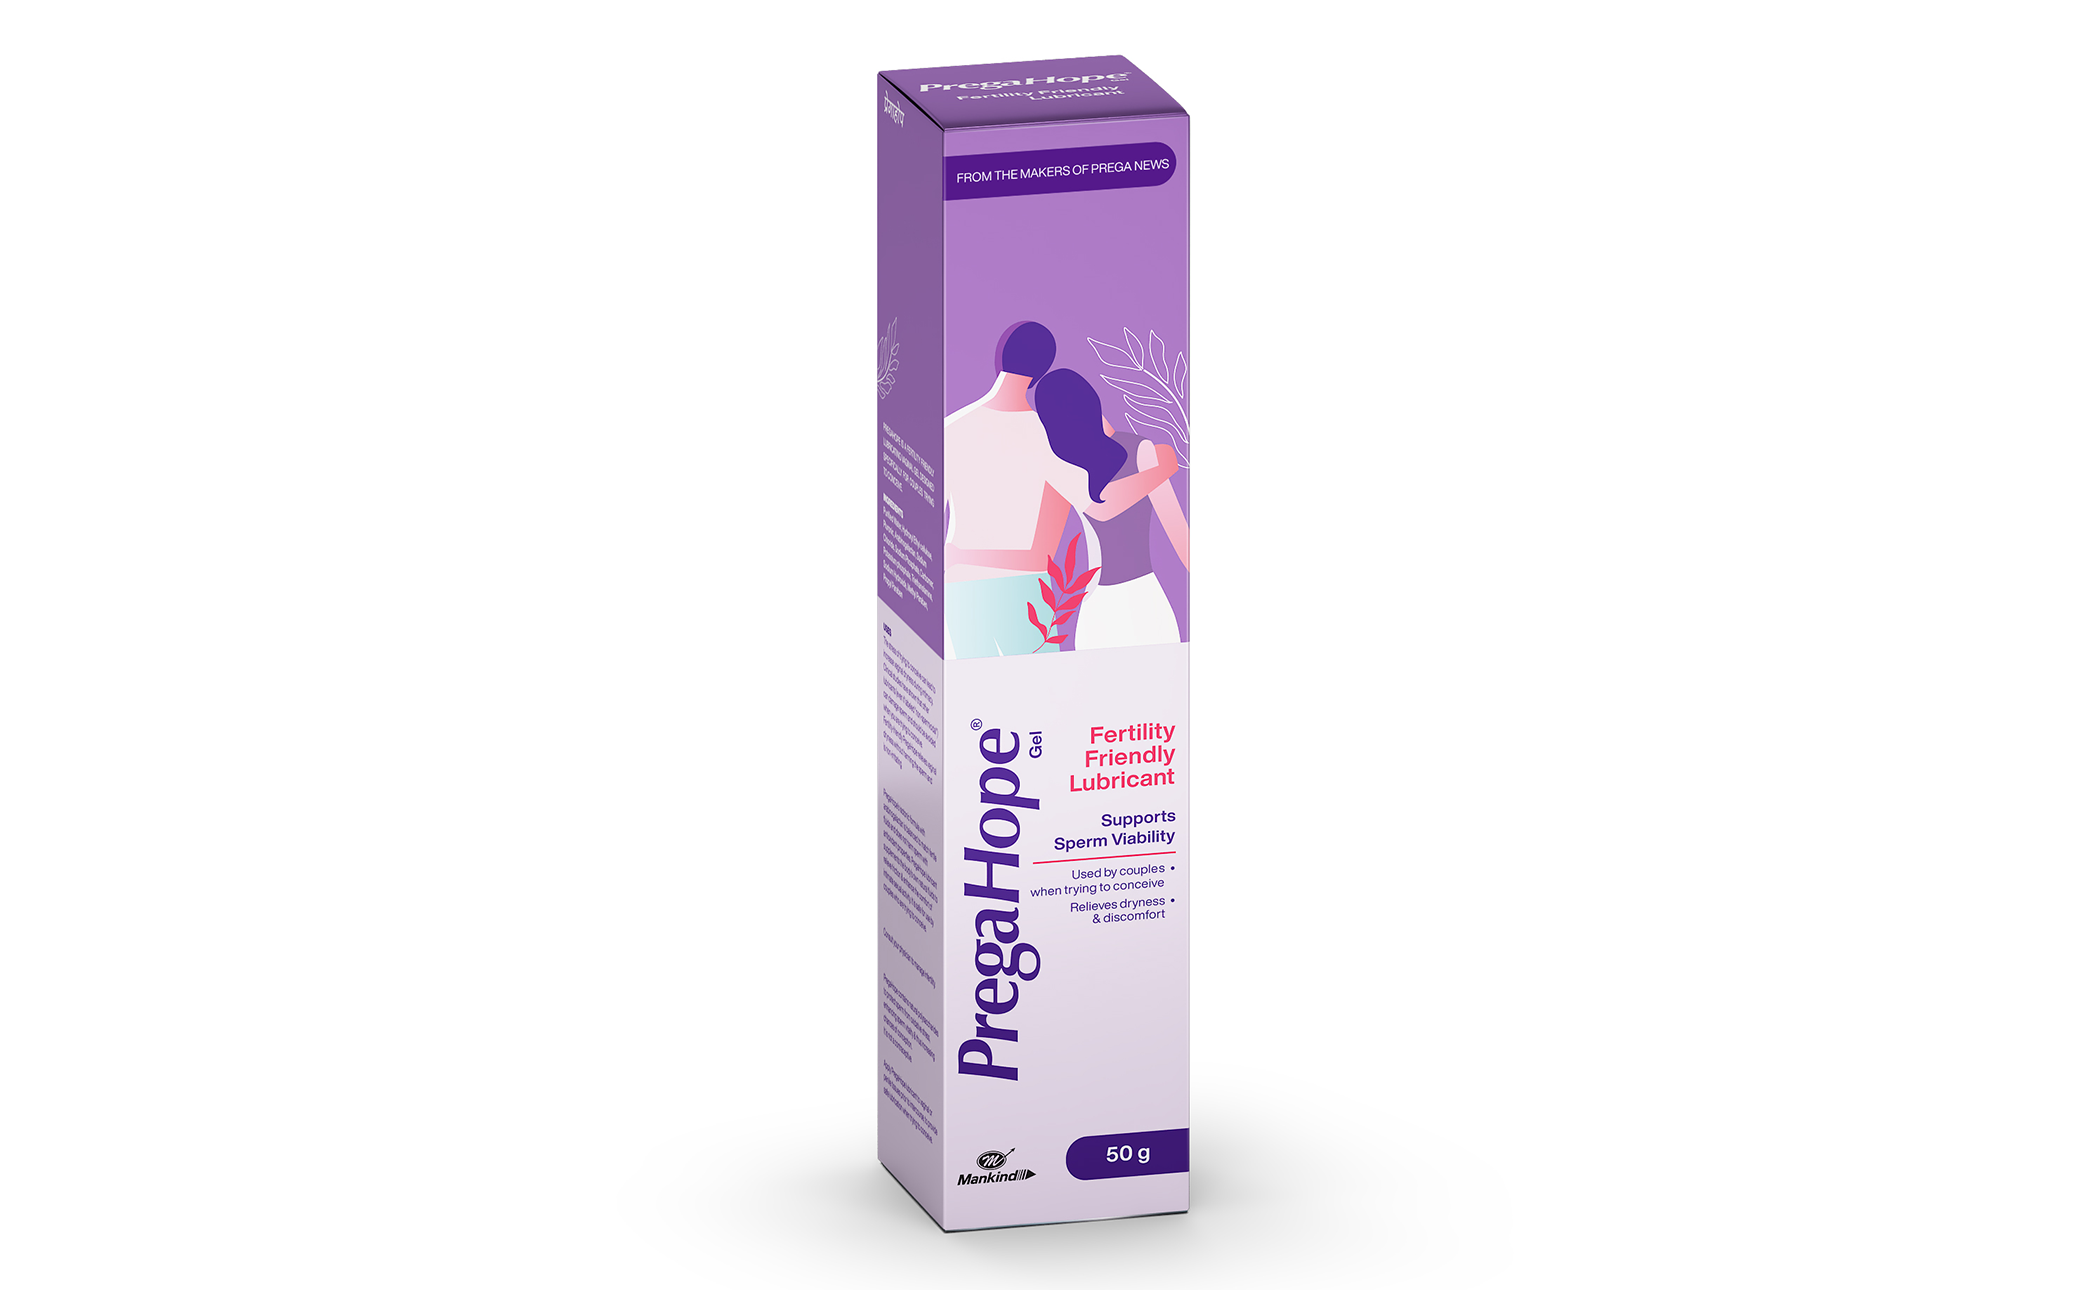 Prega Hope Gel – Fertility Friendly Lubricant make every private moment a cause for hope.